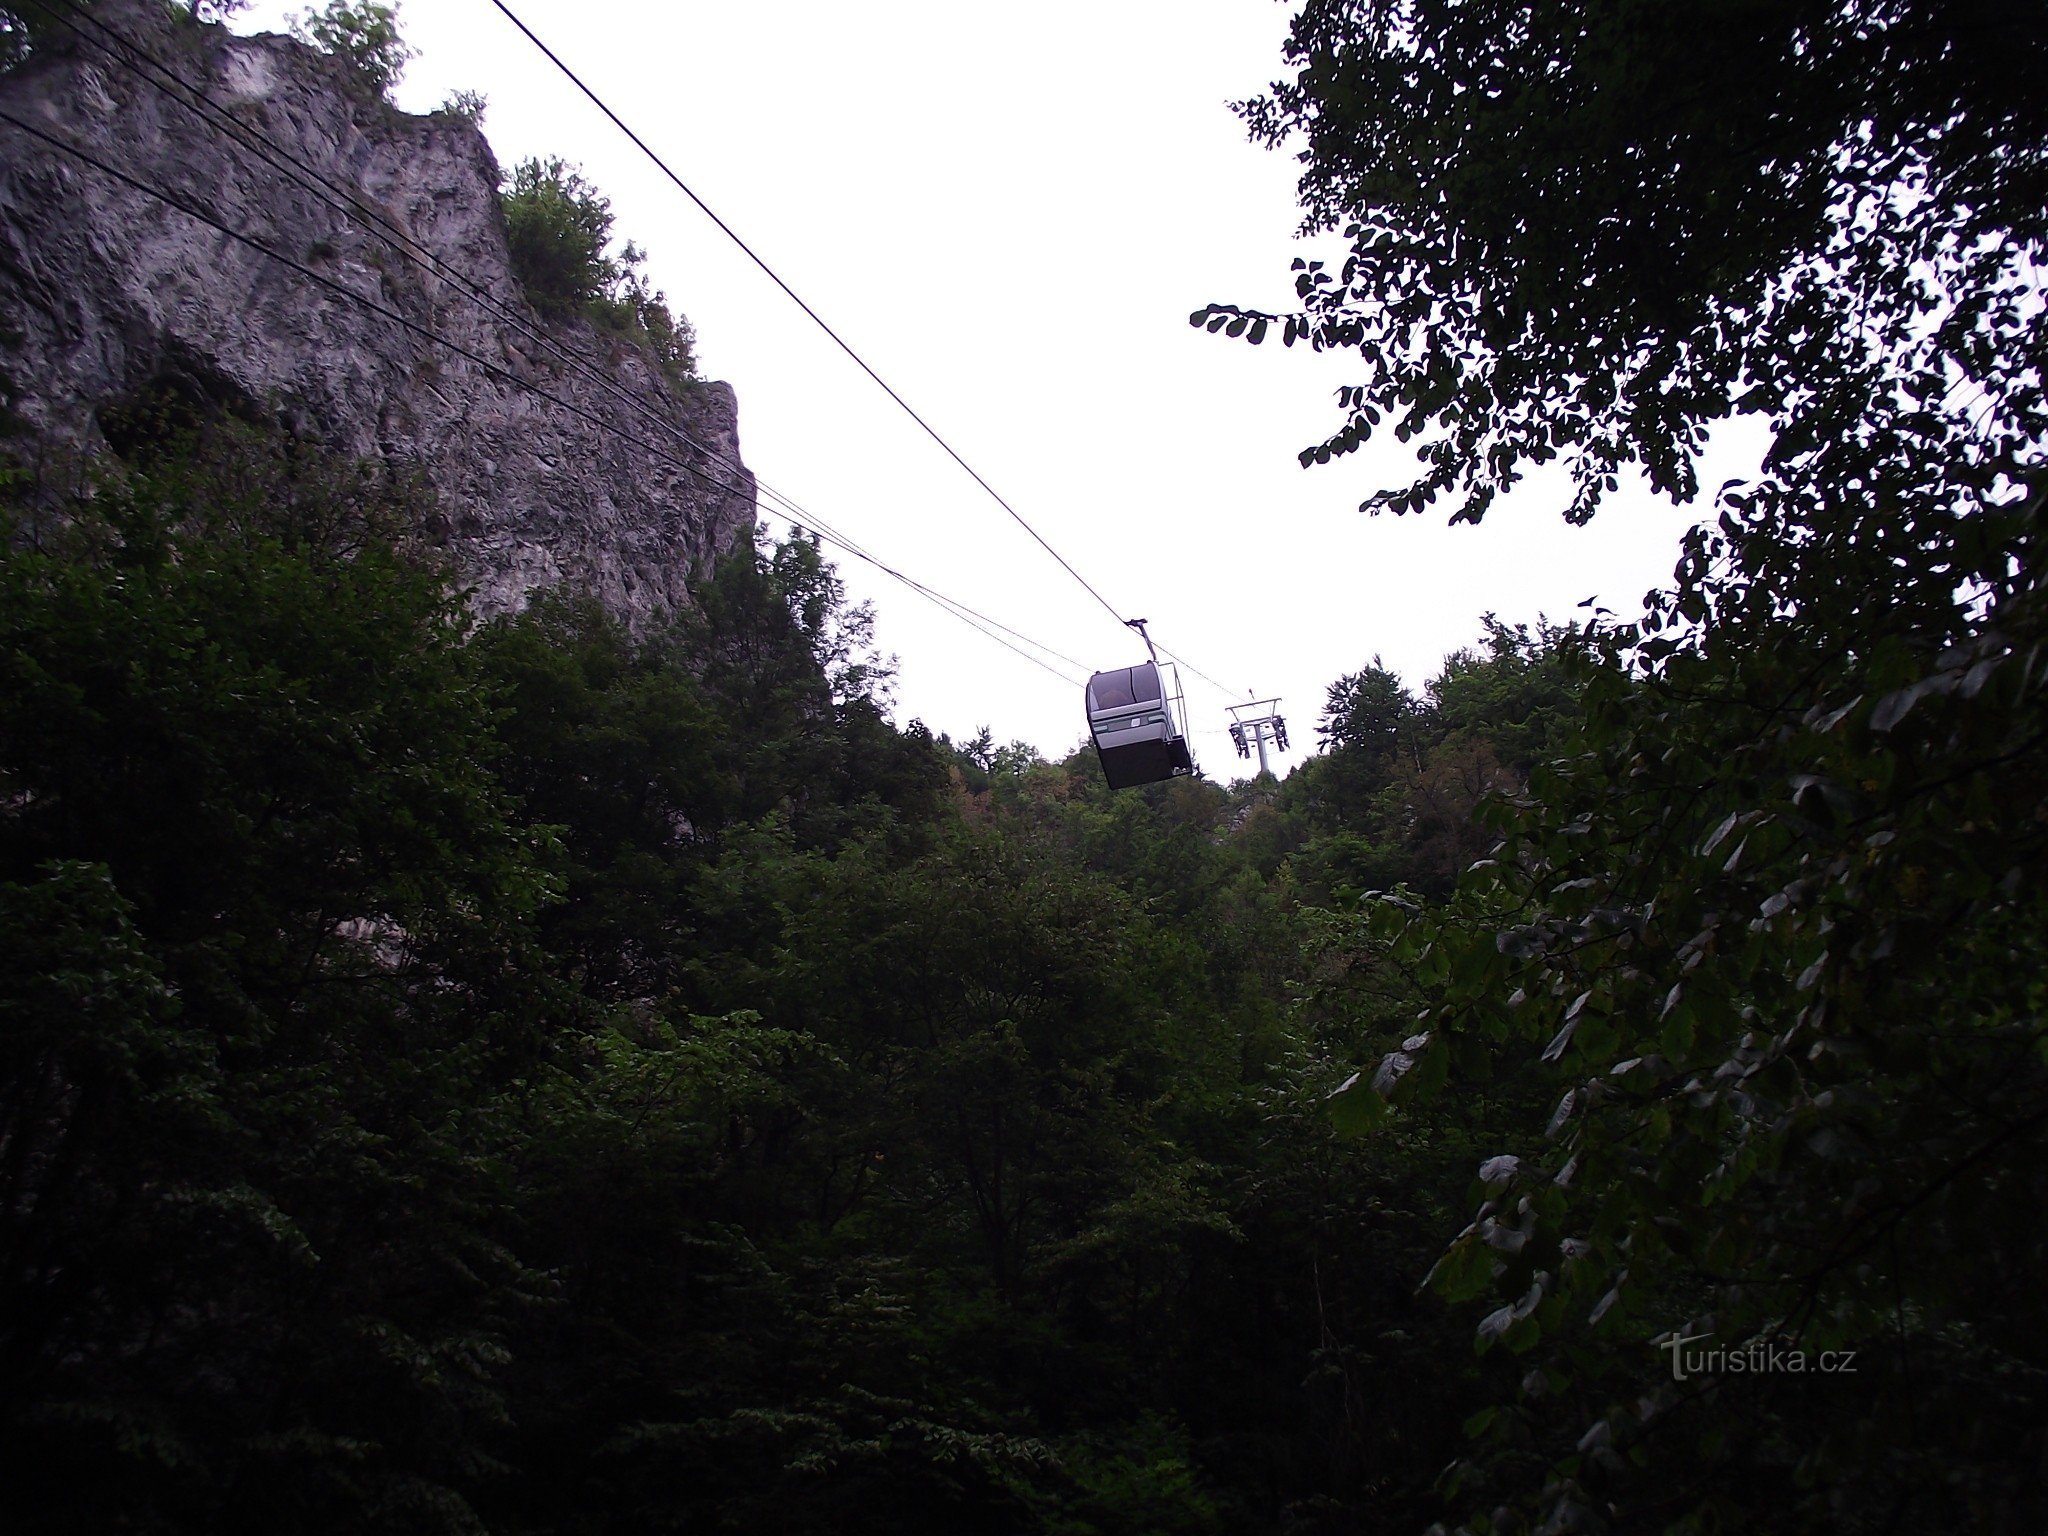 Cable car between Macocha and Punkevní caves